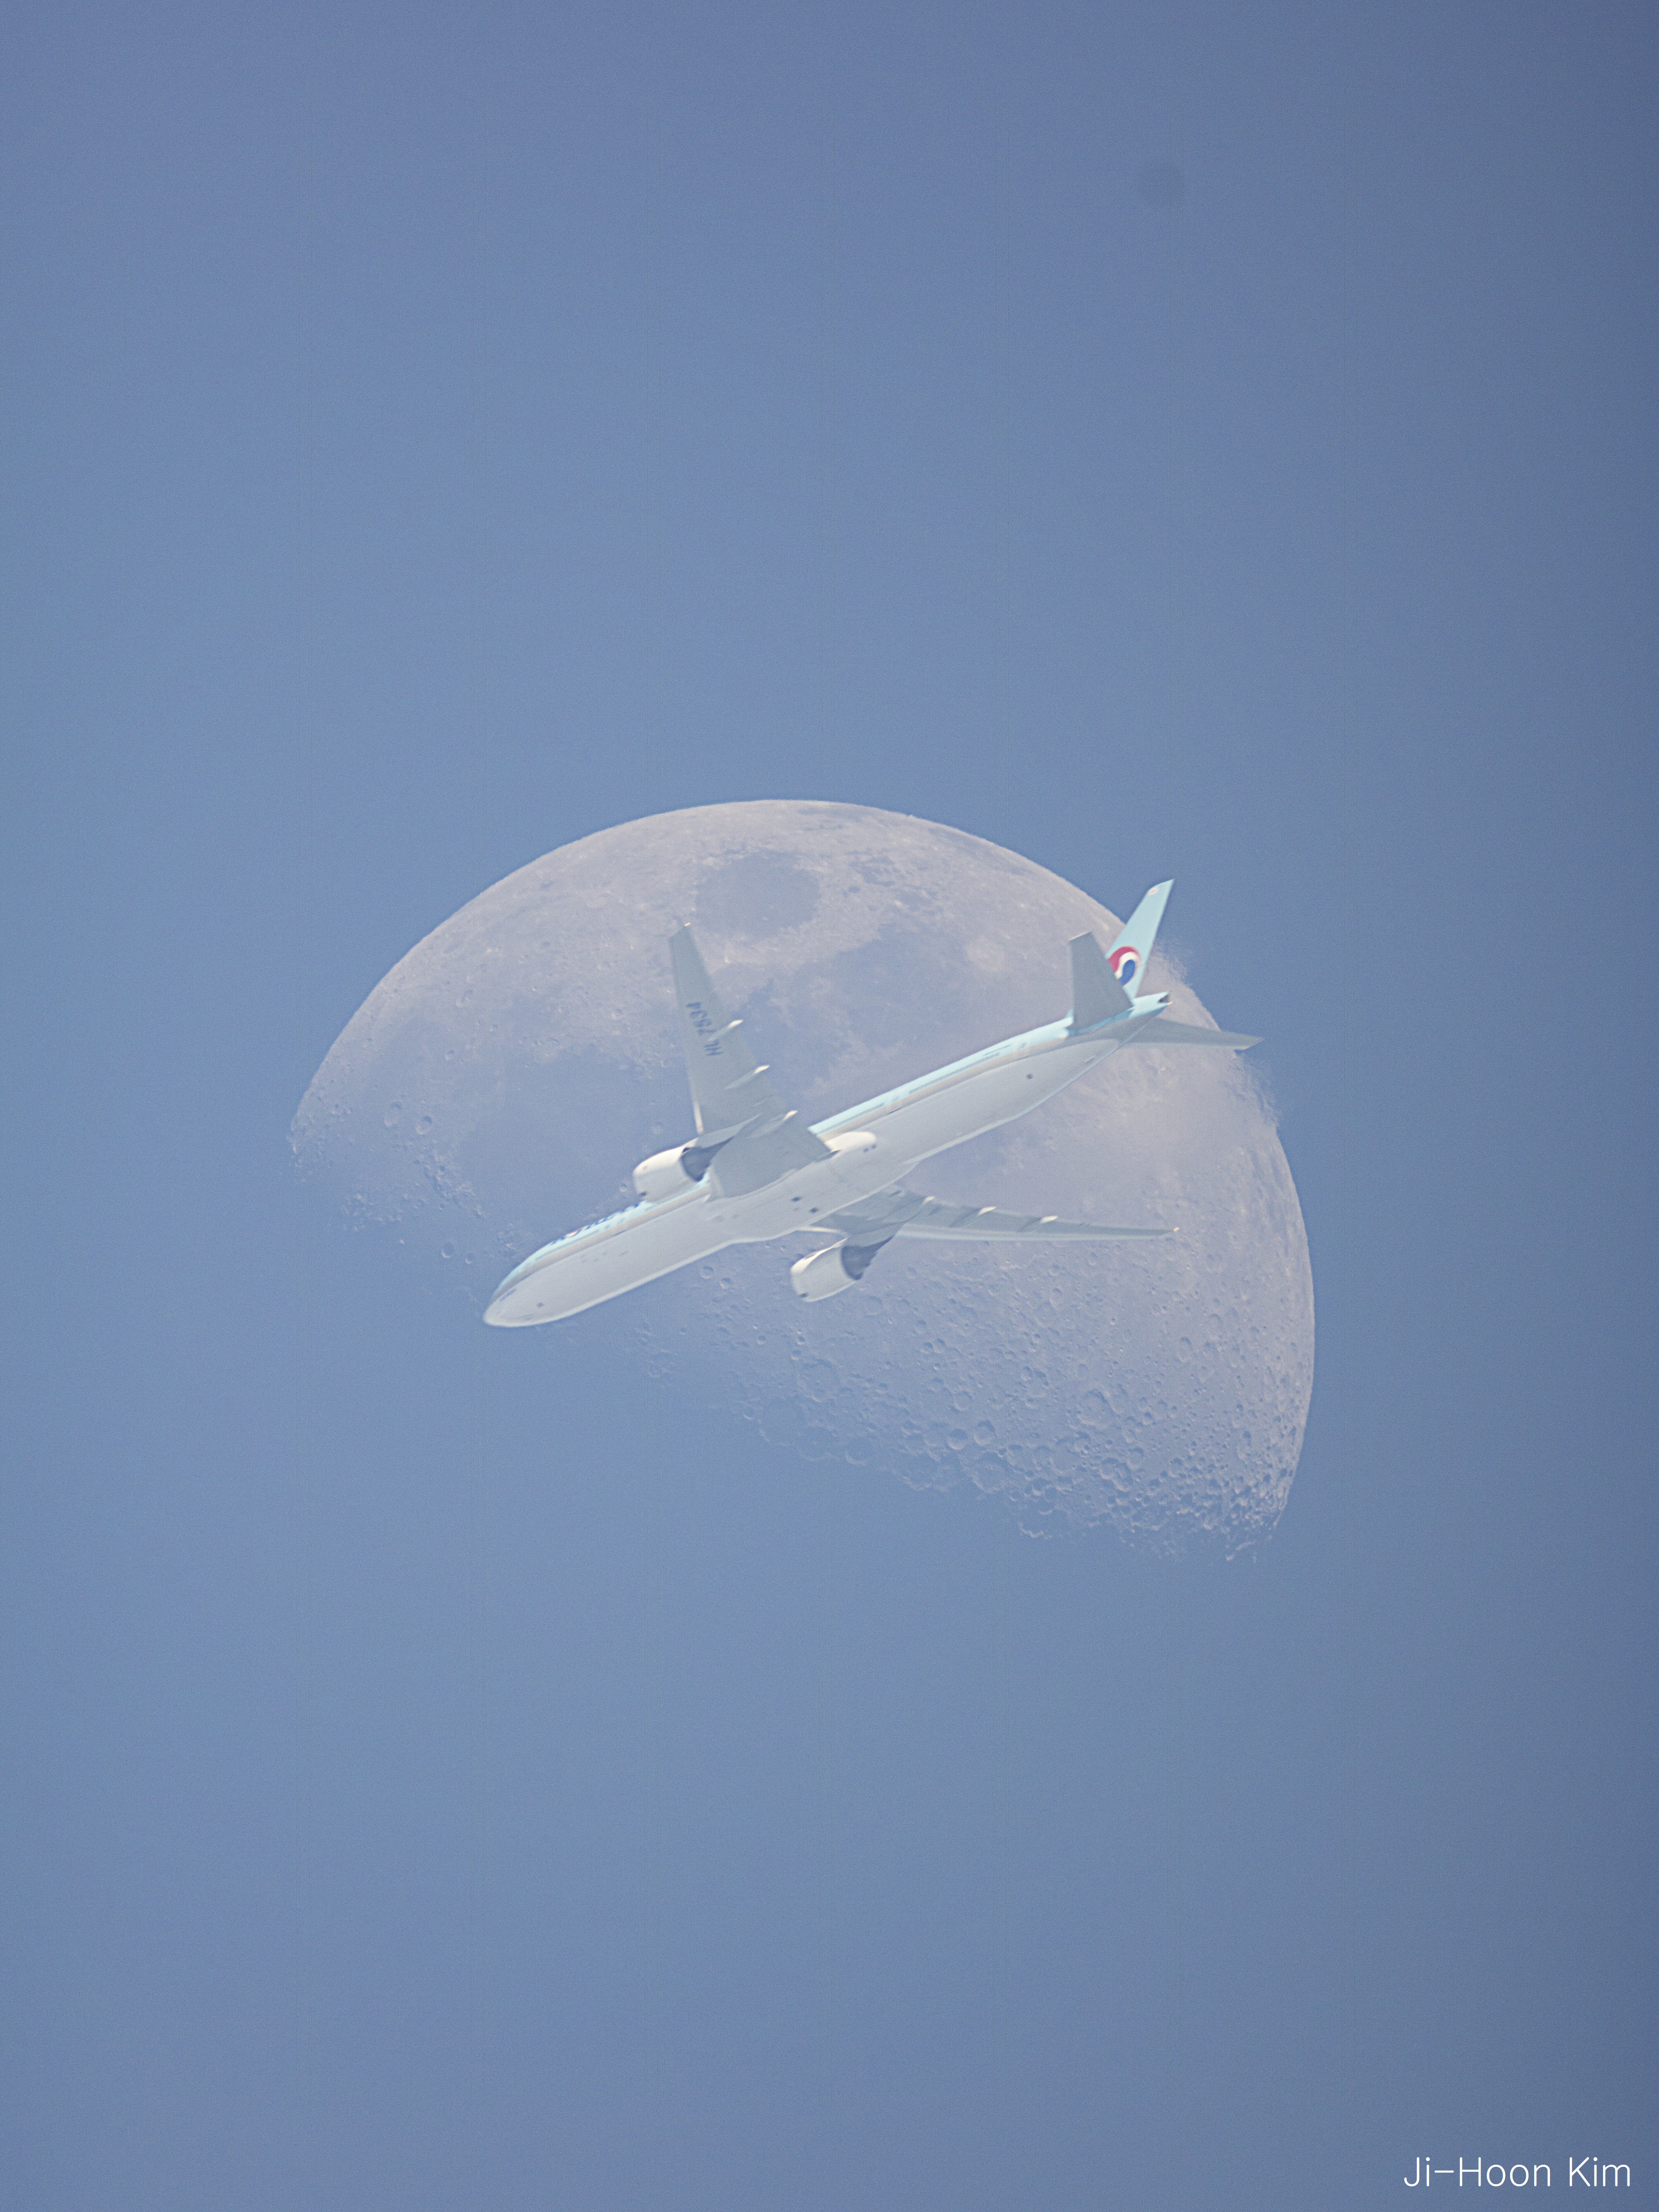 An Airplane in Front of the Moon